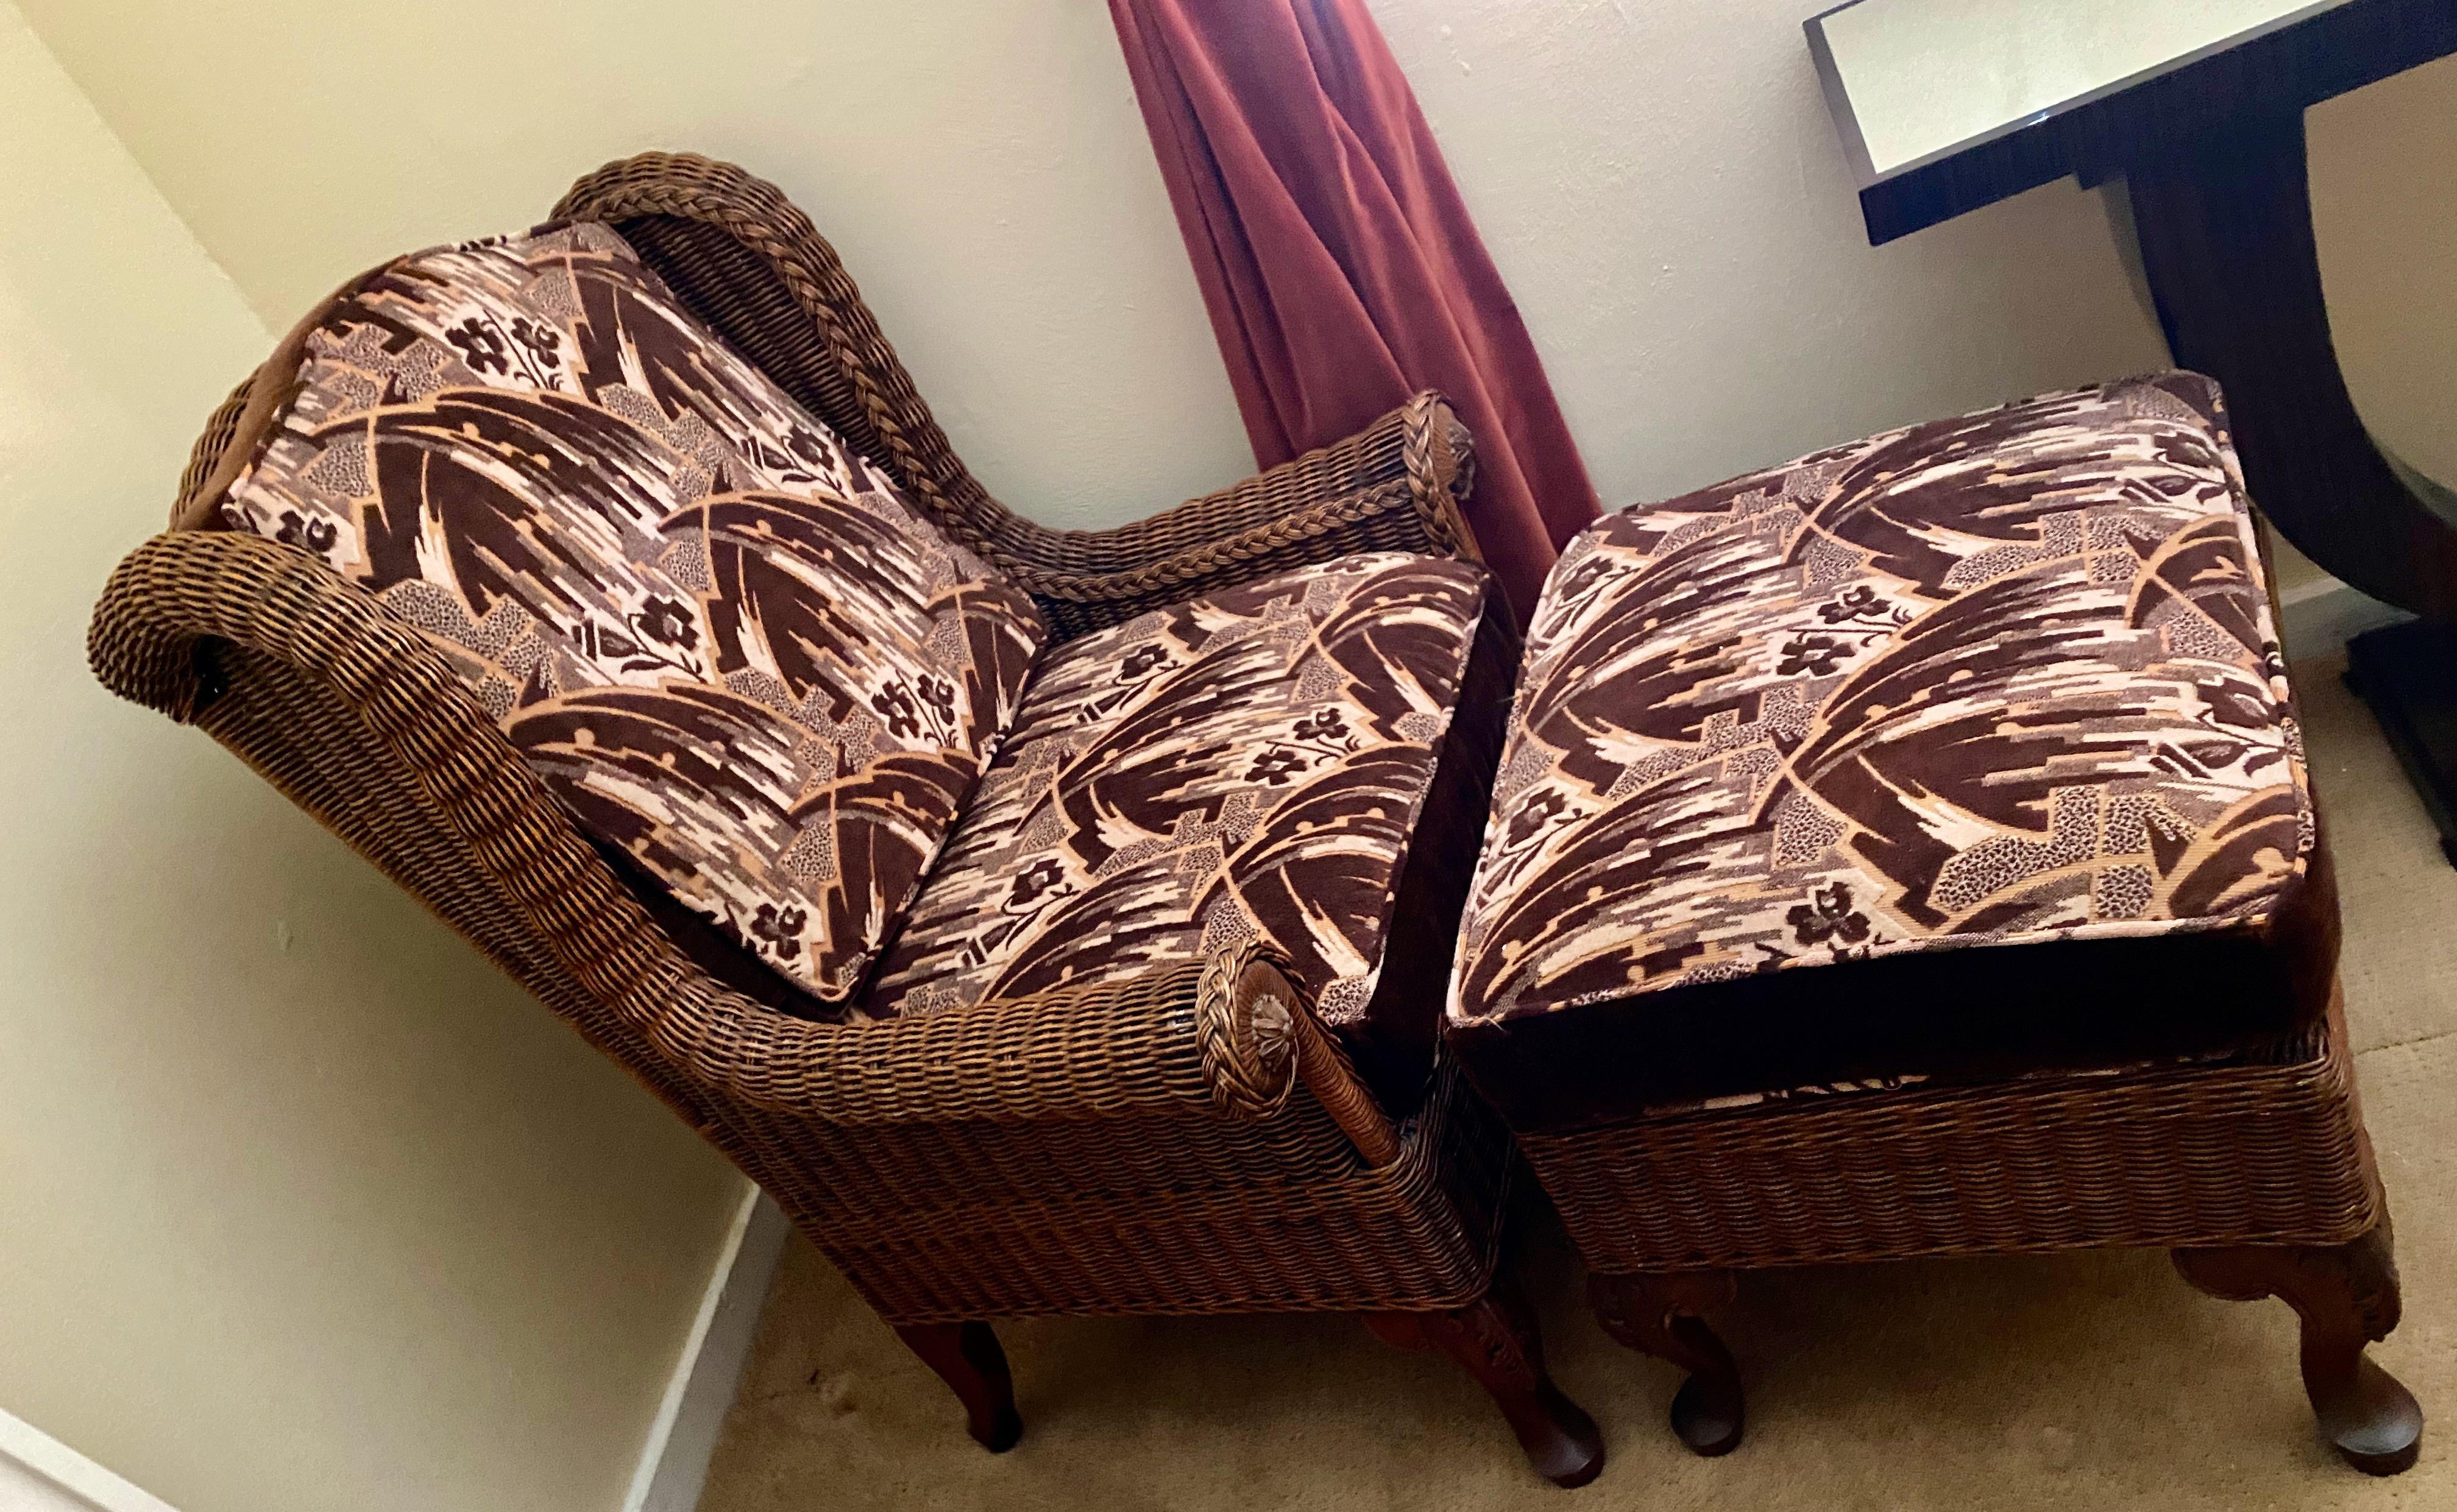 Wicker high back Art Deco lounge chair and stool with original Art Deco fabric. Quality wicker vintage style possibly made by McGuire with high shaped back, interesting rounded arms, and over high quality. Set has a matching footstool also. We had